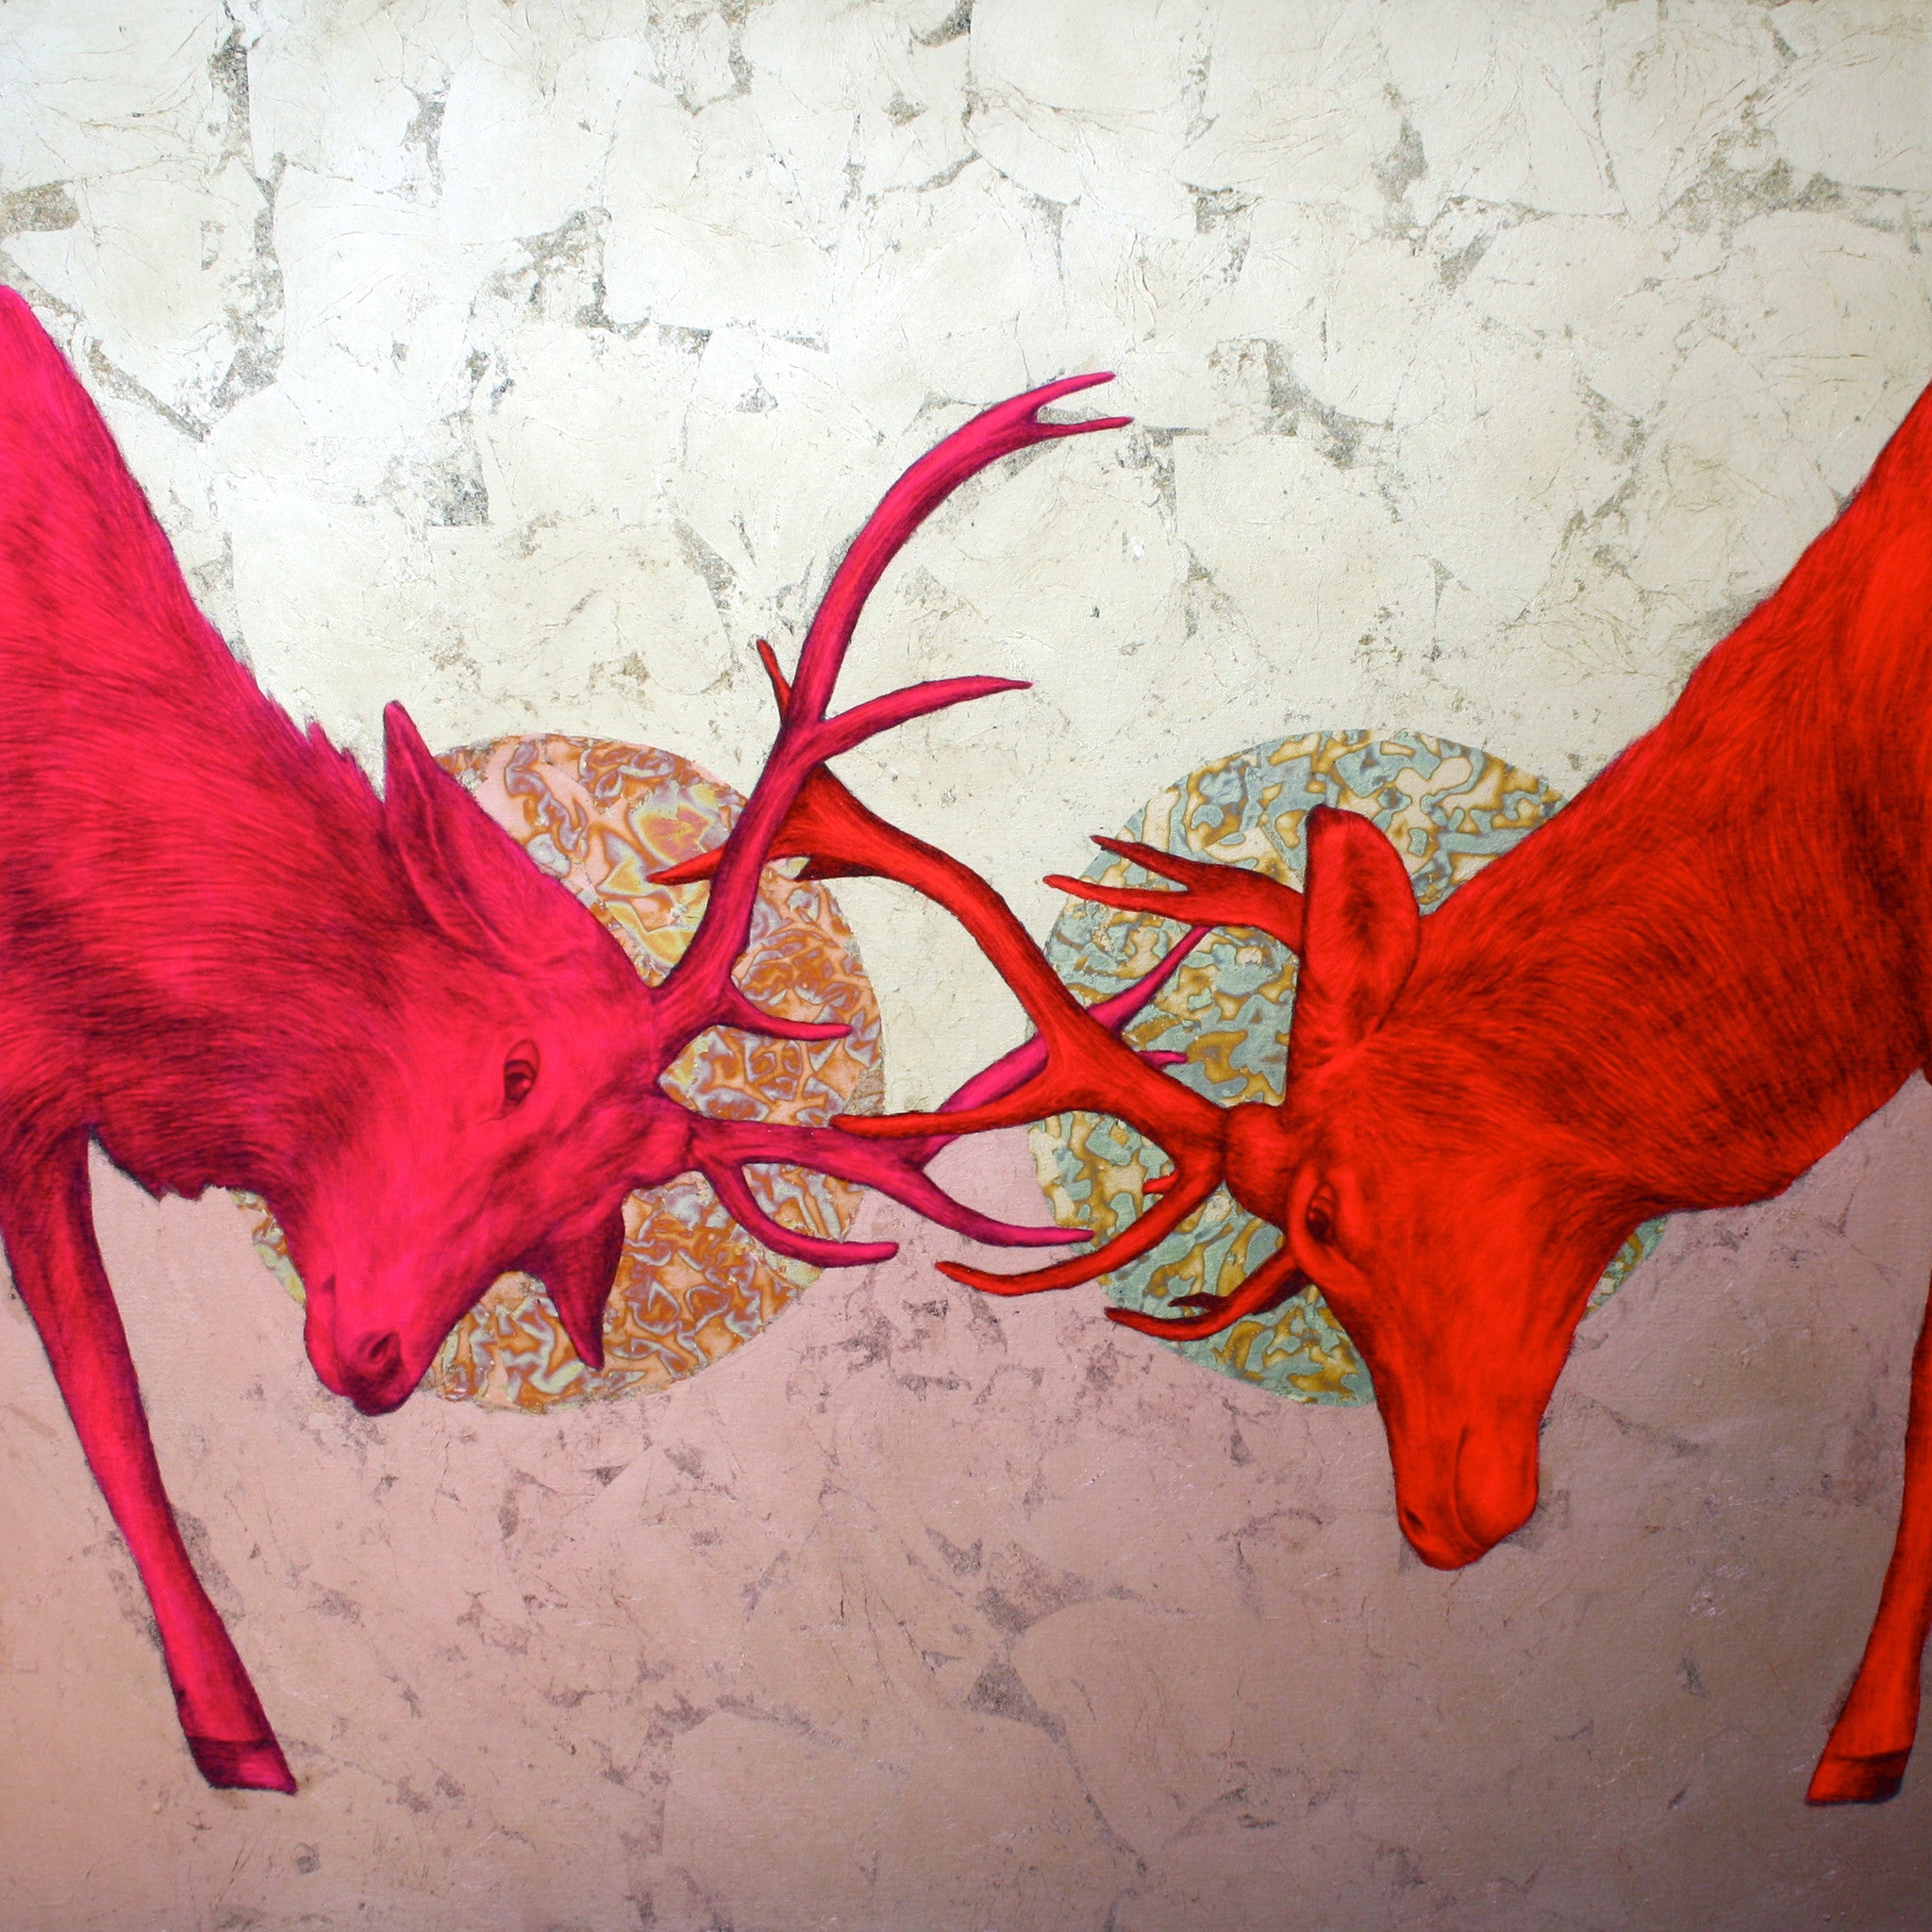 'In A Wild Place', Original Work by Louise McNaught